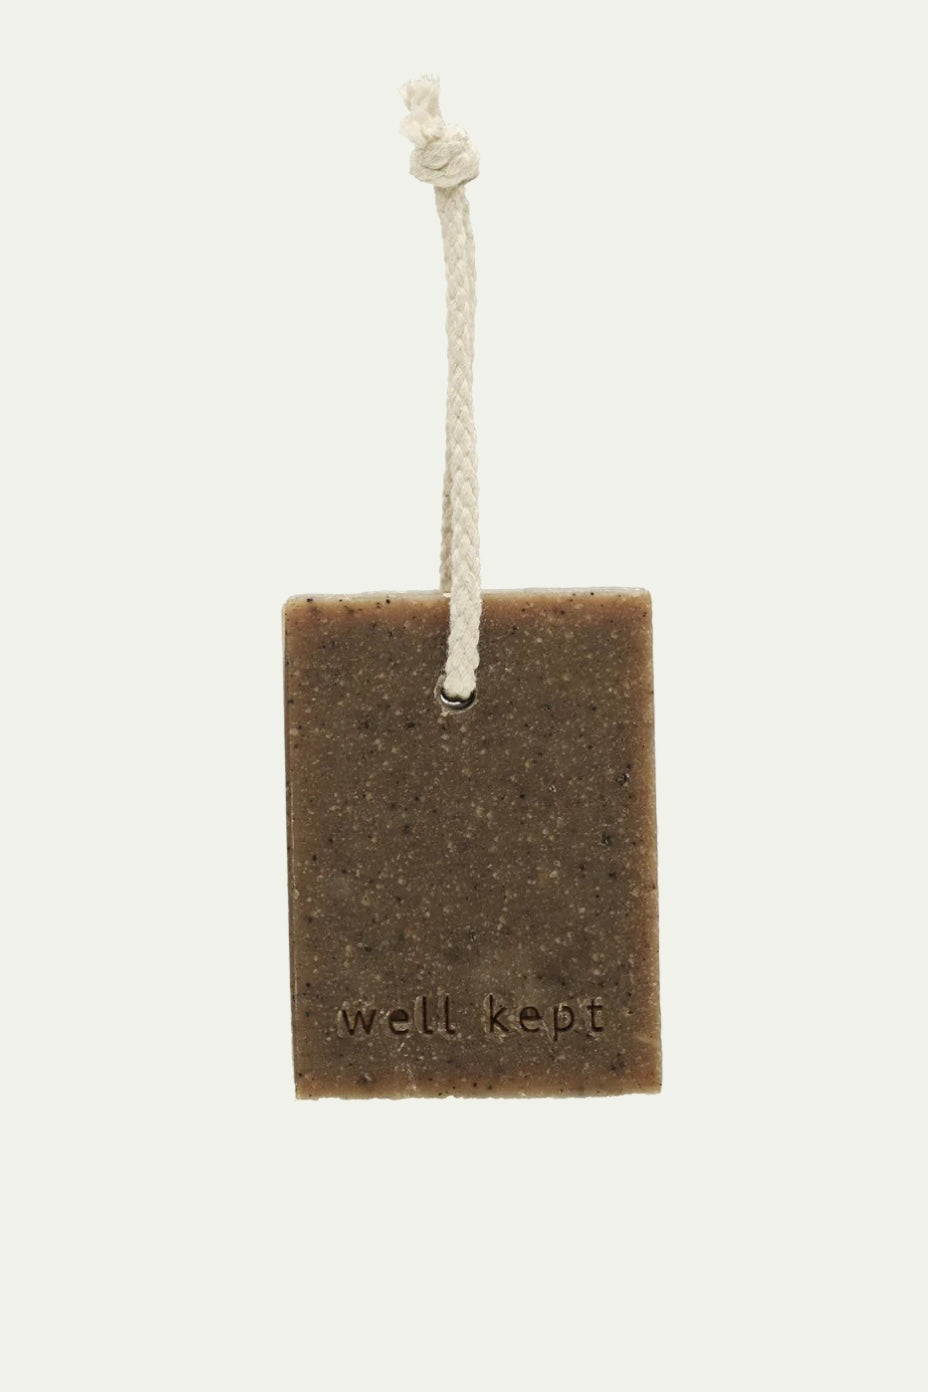 Well Kept - Exude - Hand and Body Soap